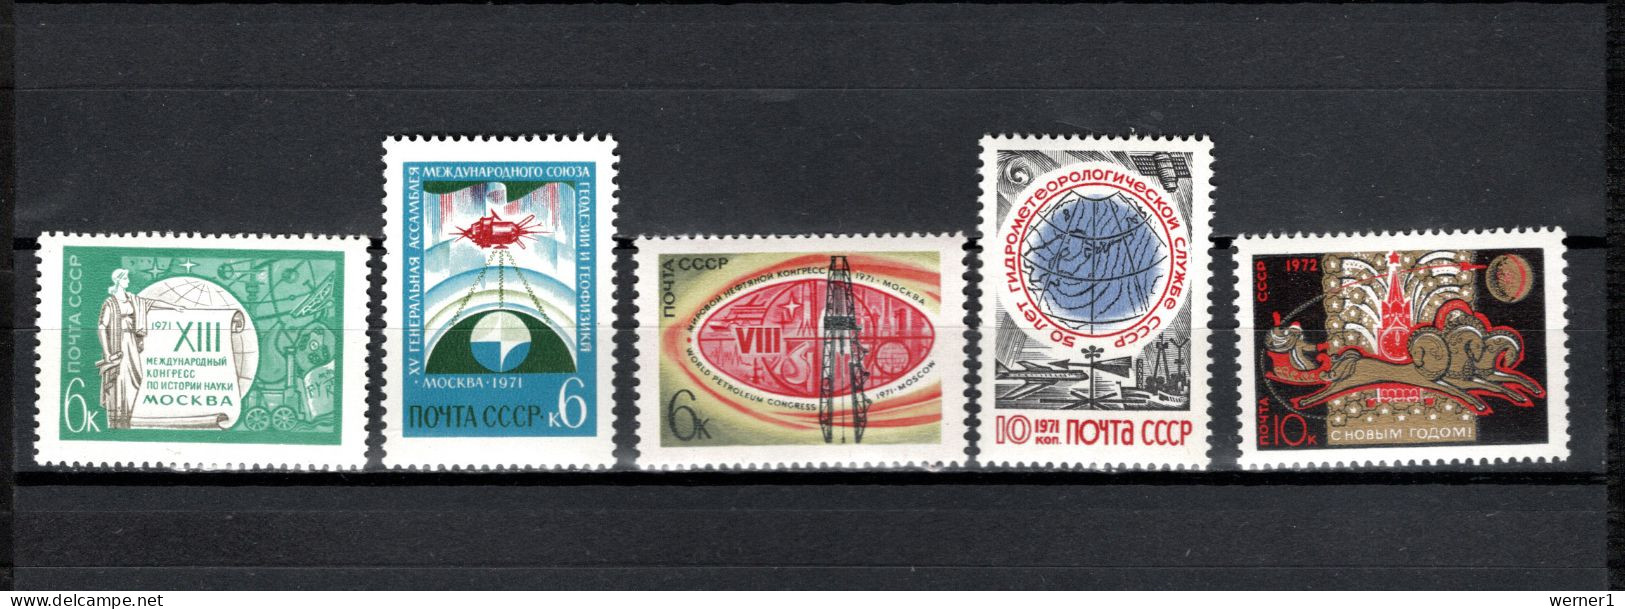 USSR Russia 1971 Space, International Congress Moscow, Meteorology, New Year 5 Stamps MNH - UdSSR